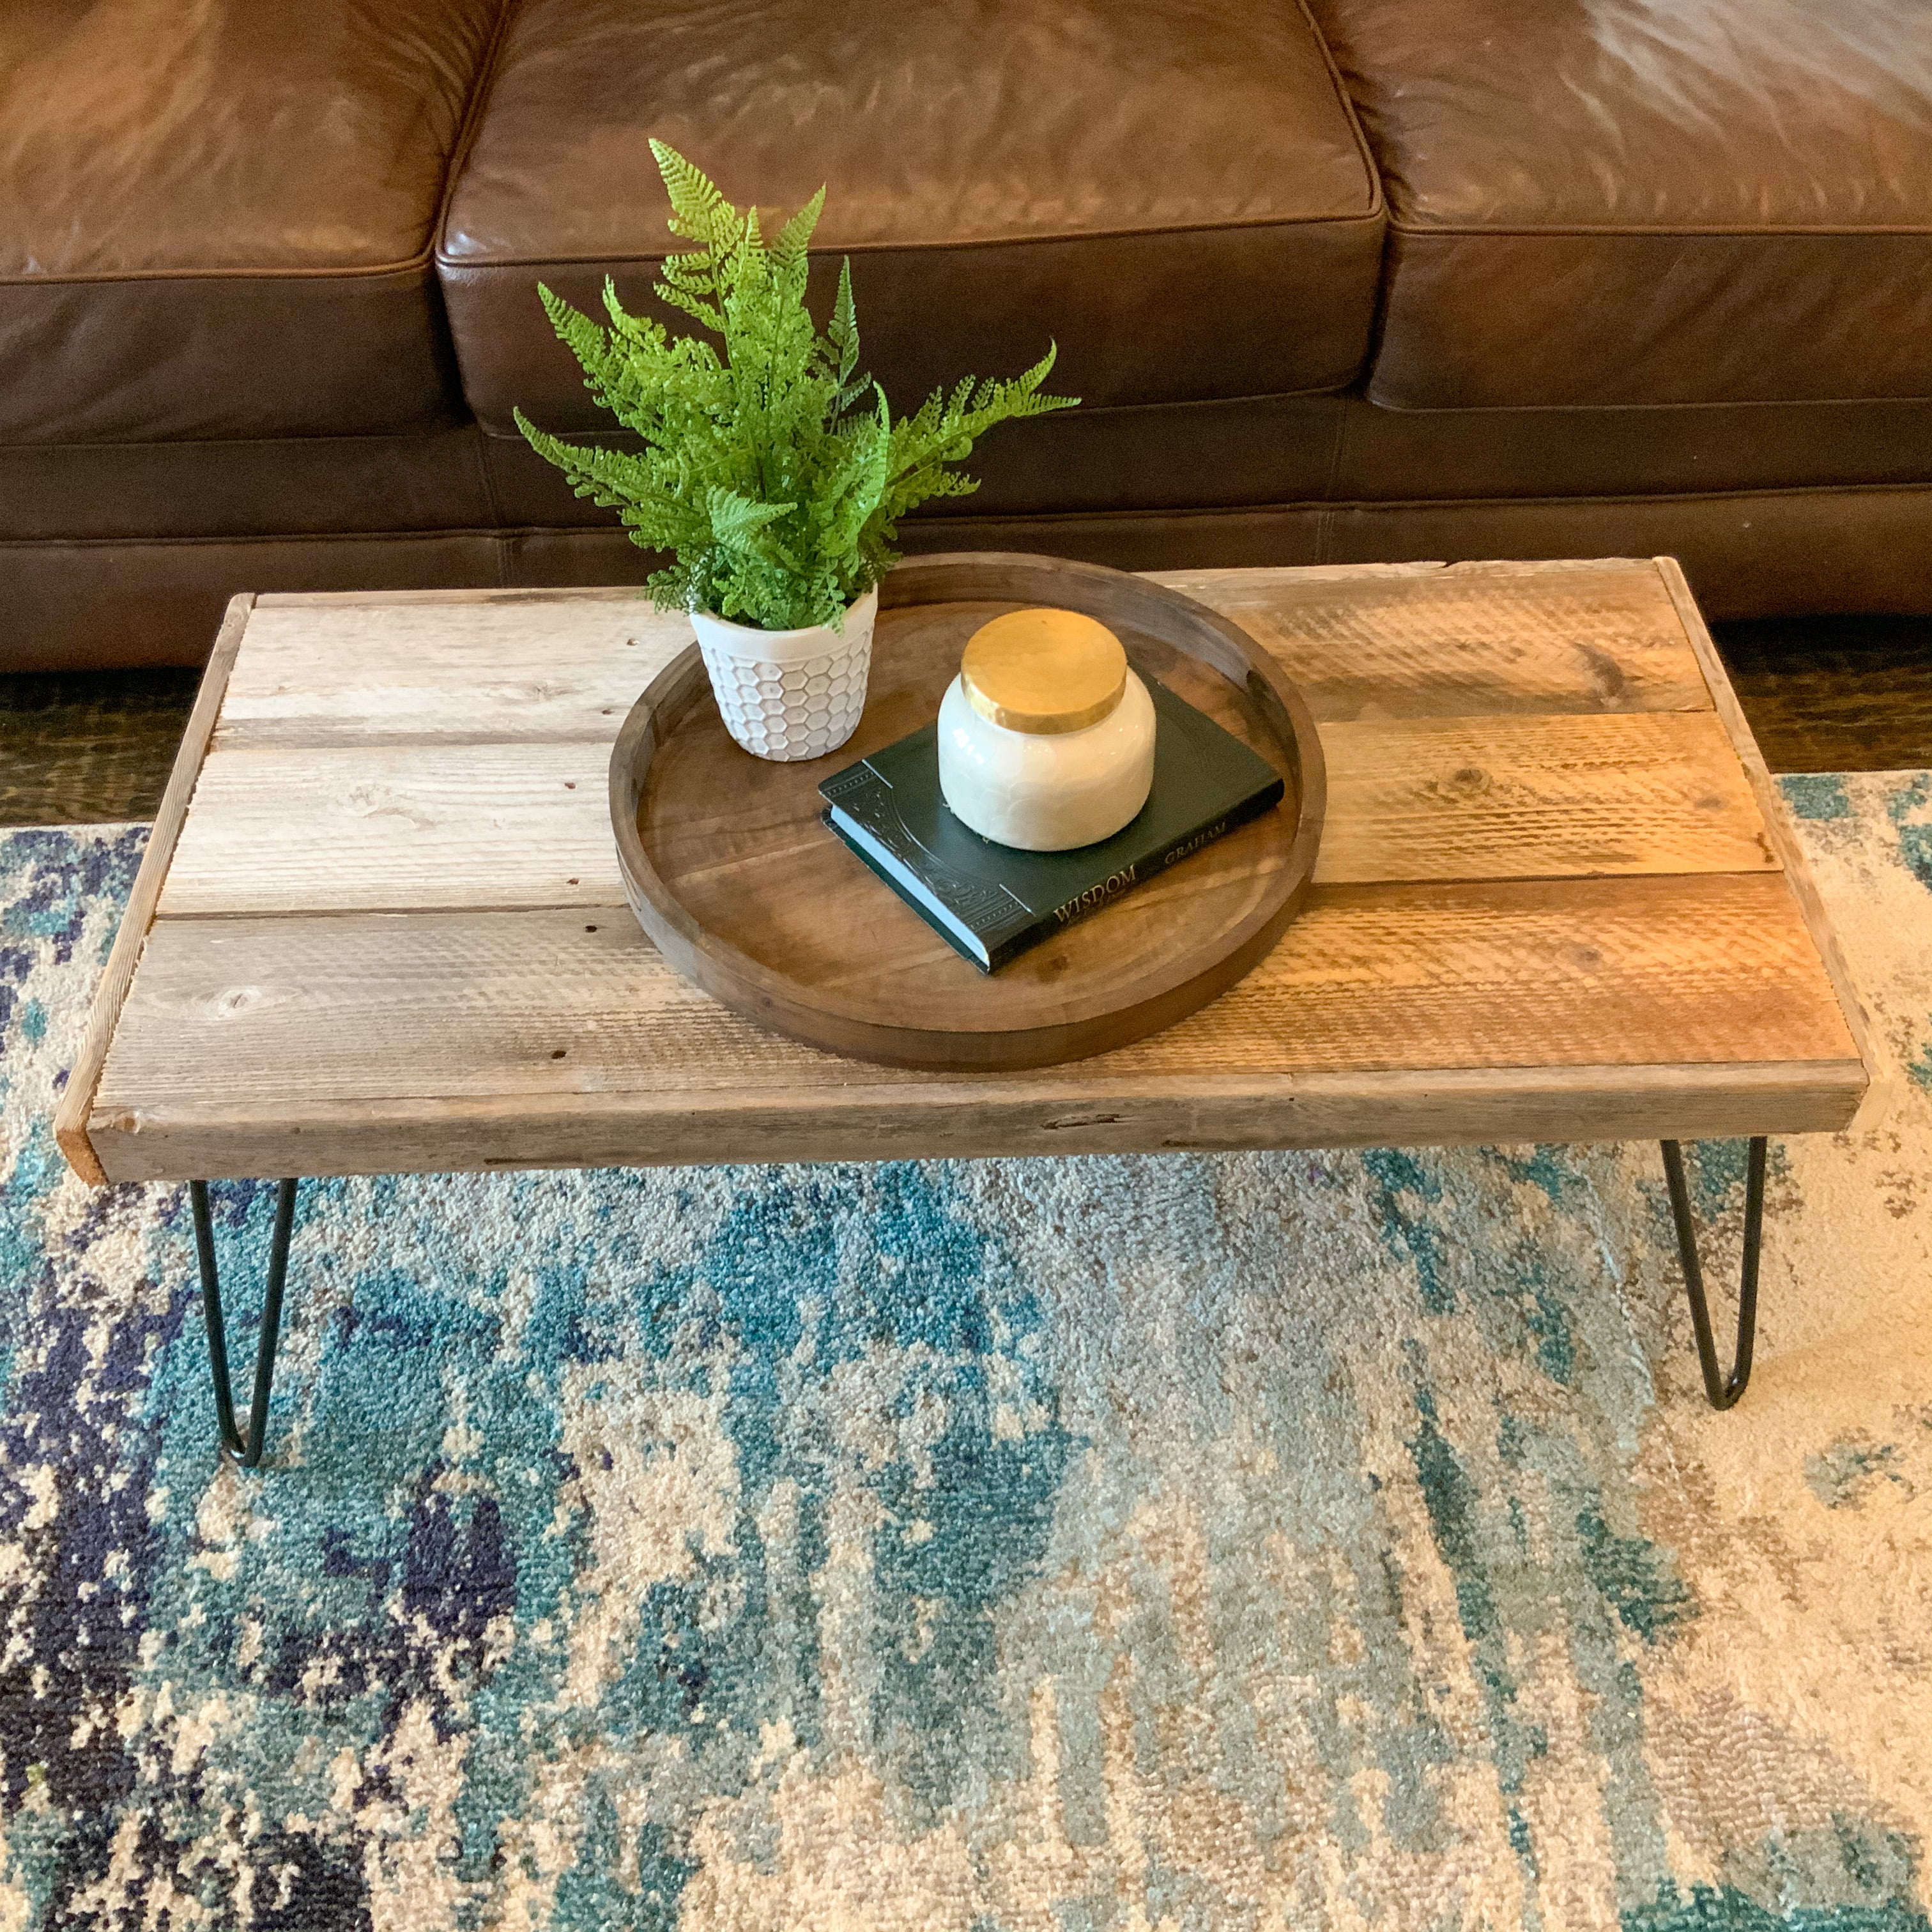 HEIRLOUM Reclaimed Wood Table Top - Rustic Recycled Wooden Piece Perfect  for Signs, Kitchens, Dining and Coffee Table Tops (Reclaimed Wood Table Top